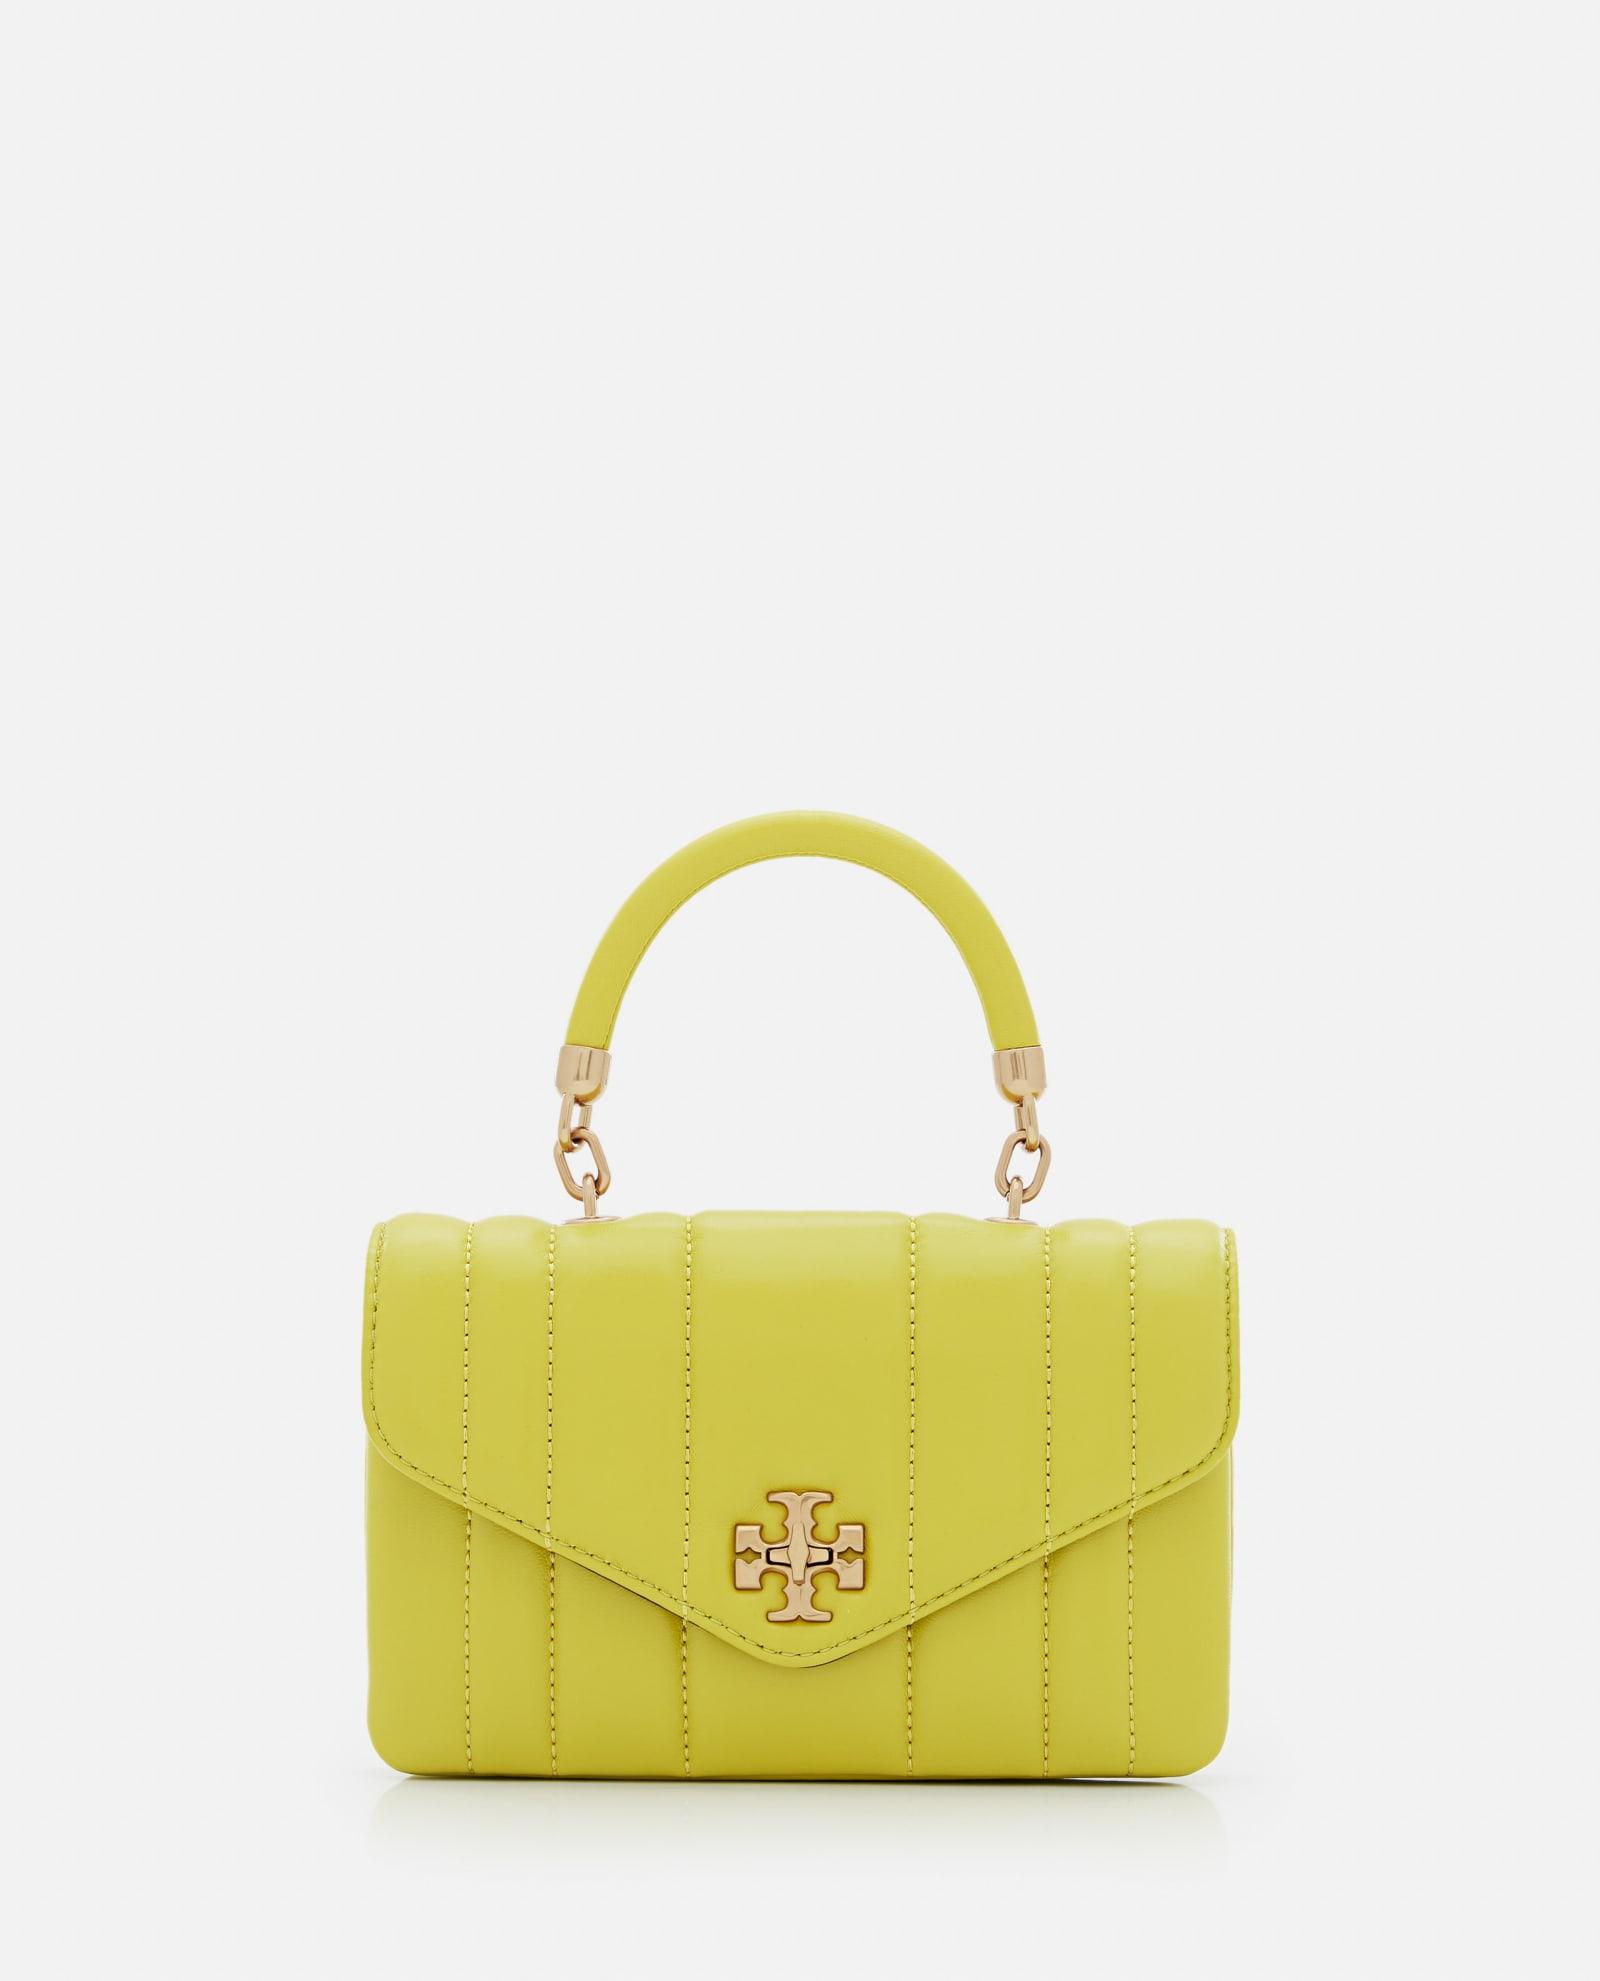 SMALL KIRA TOP HANDLE LEATHER SHOULDER BAG for Women - Tory Burch